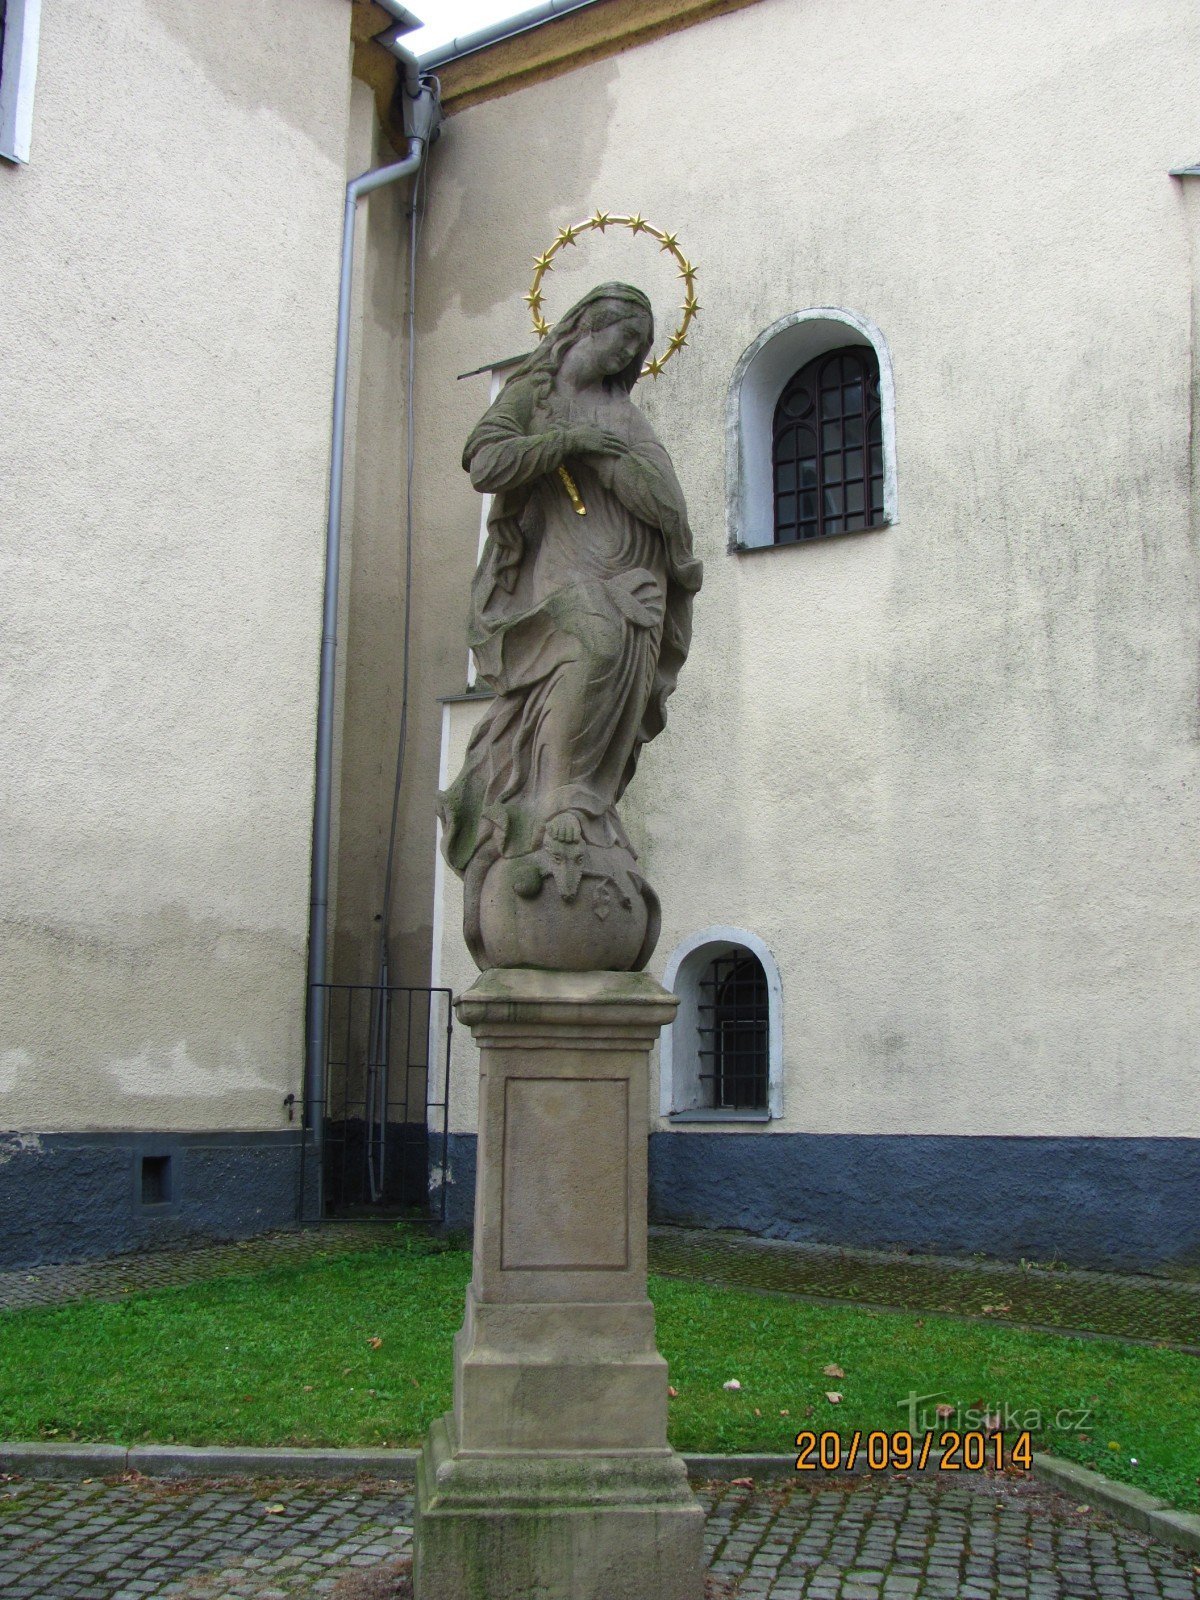 Statue of the Virgin Mary at the church of St. Kateřiny in Klimkovice